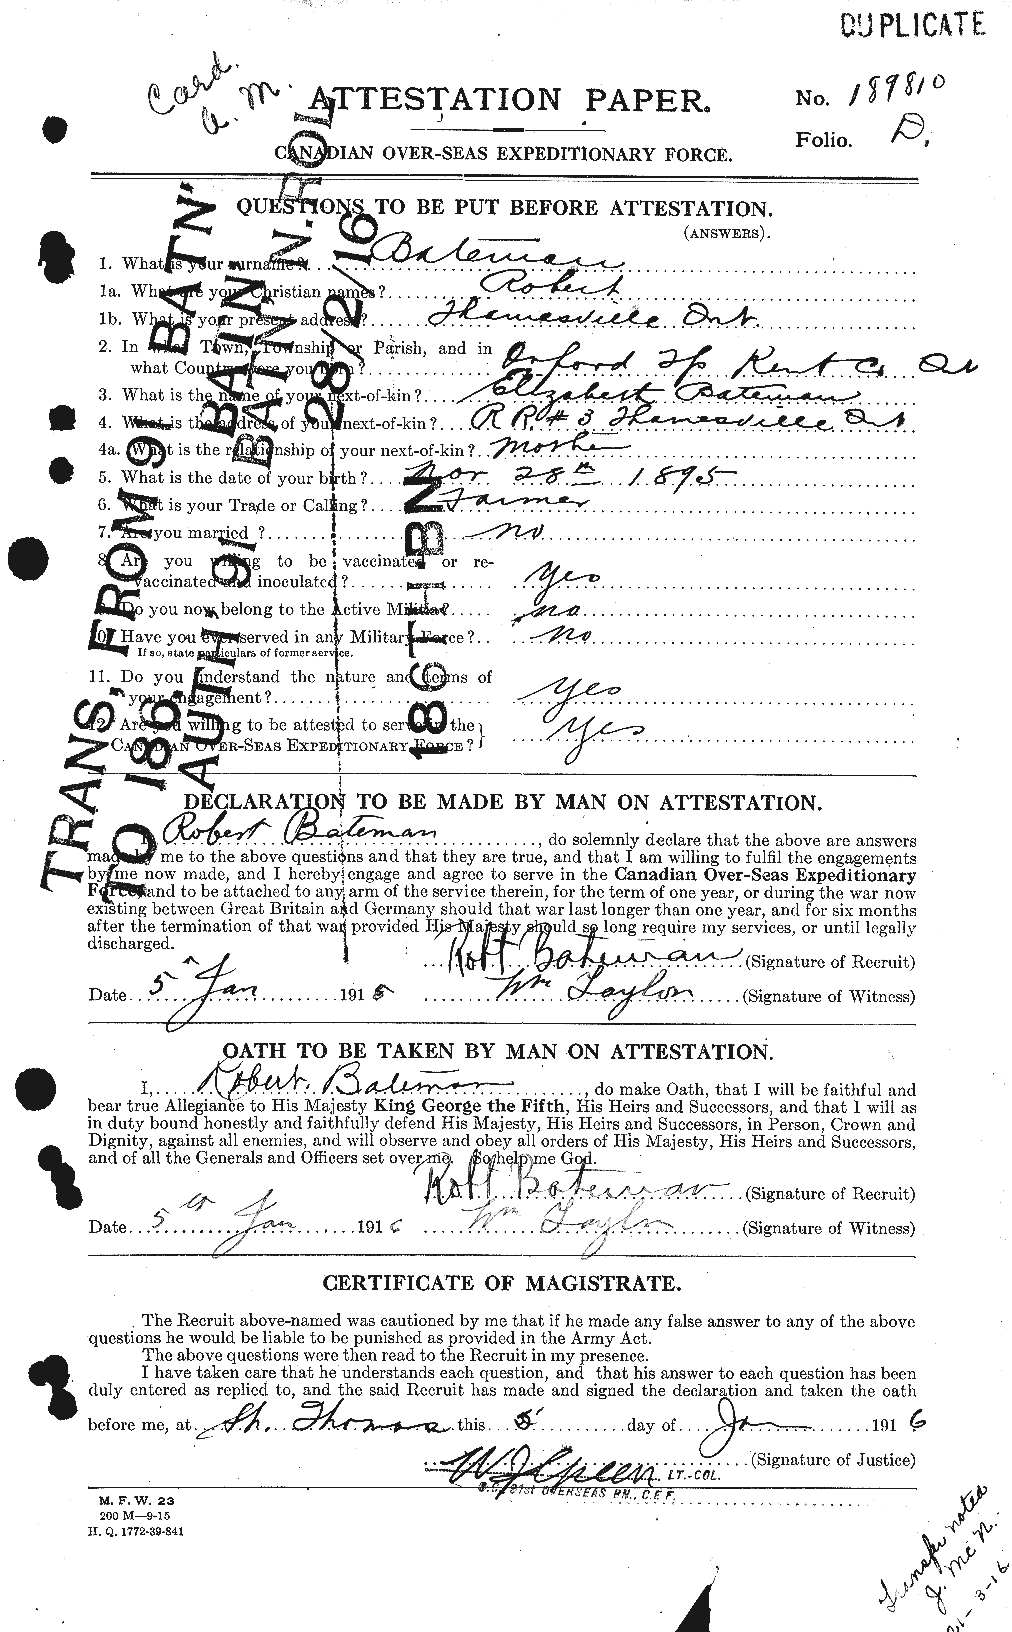 Personnel Records of the First World War - CEF 227980a